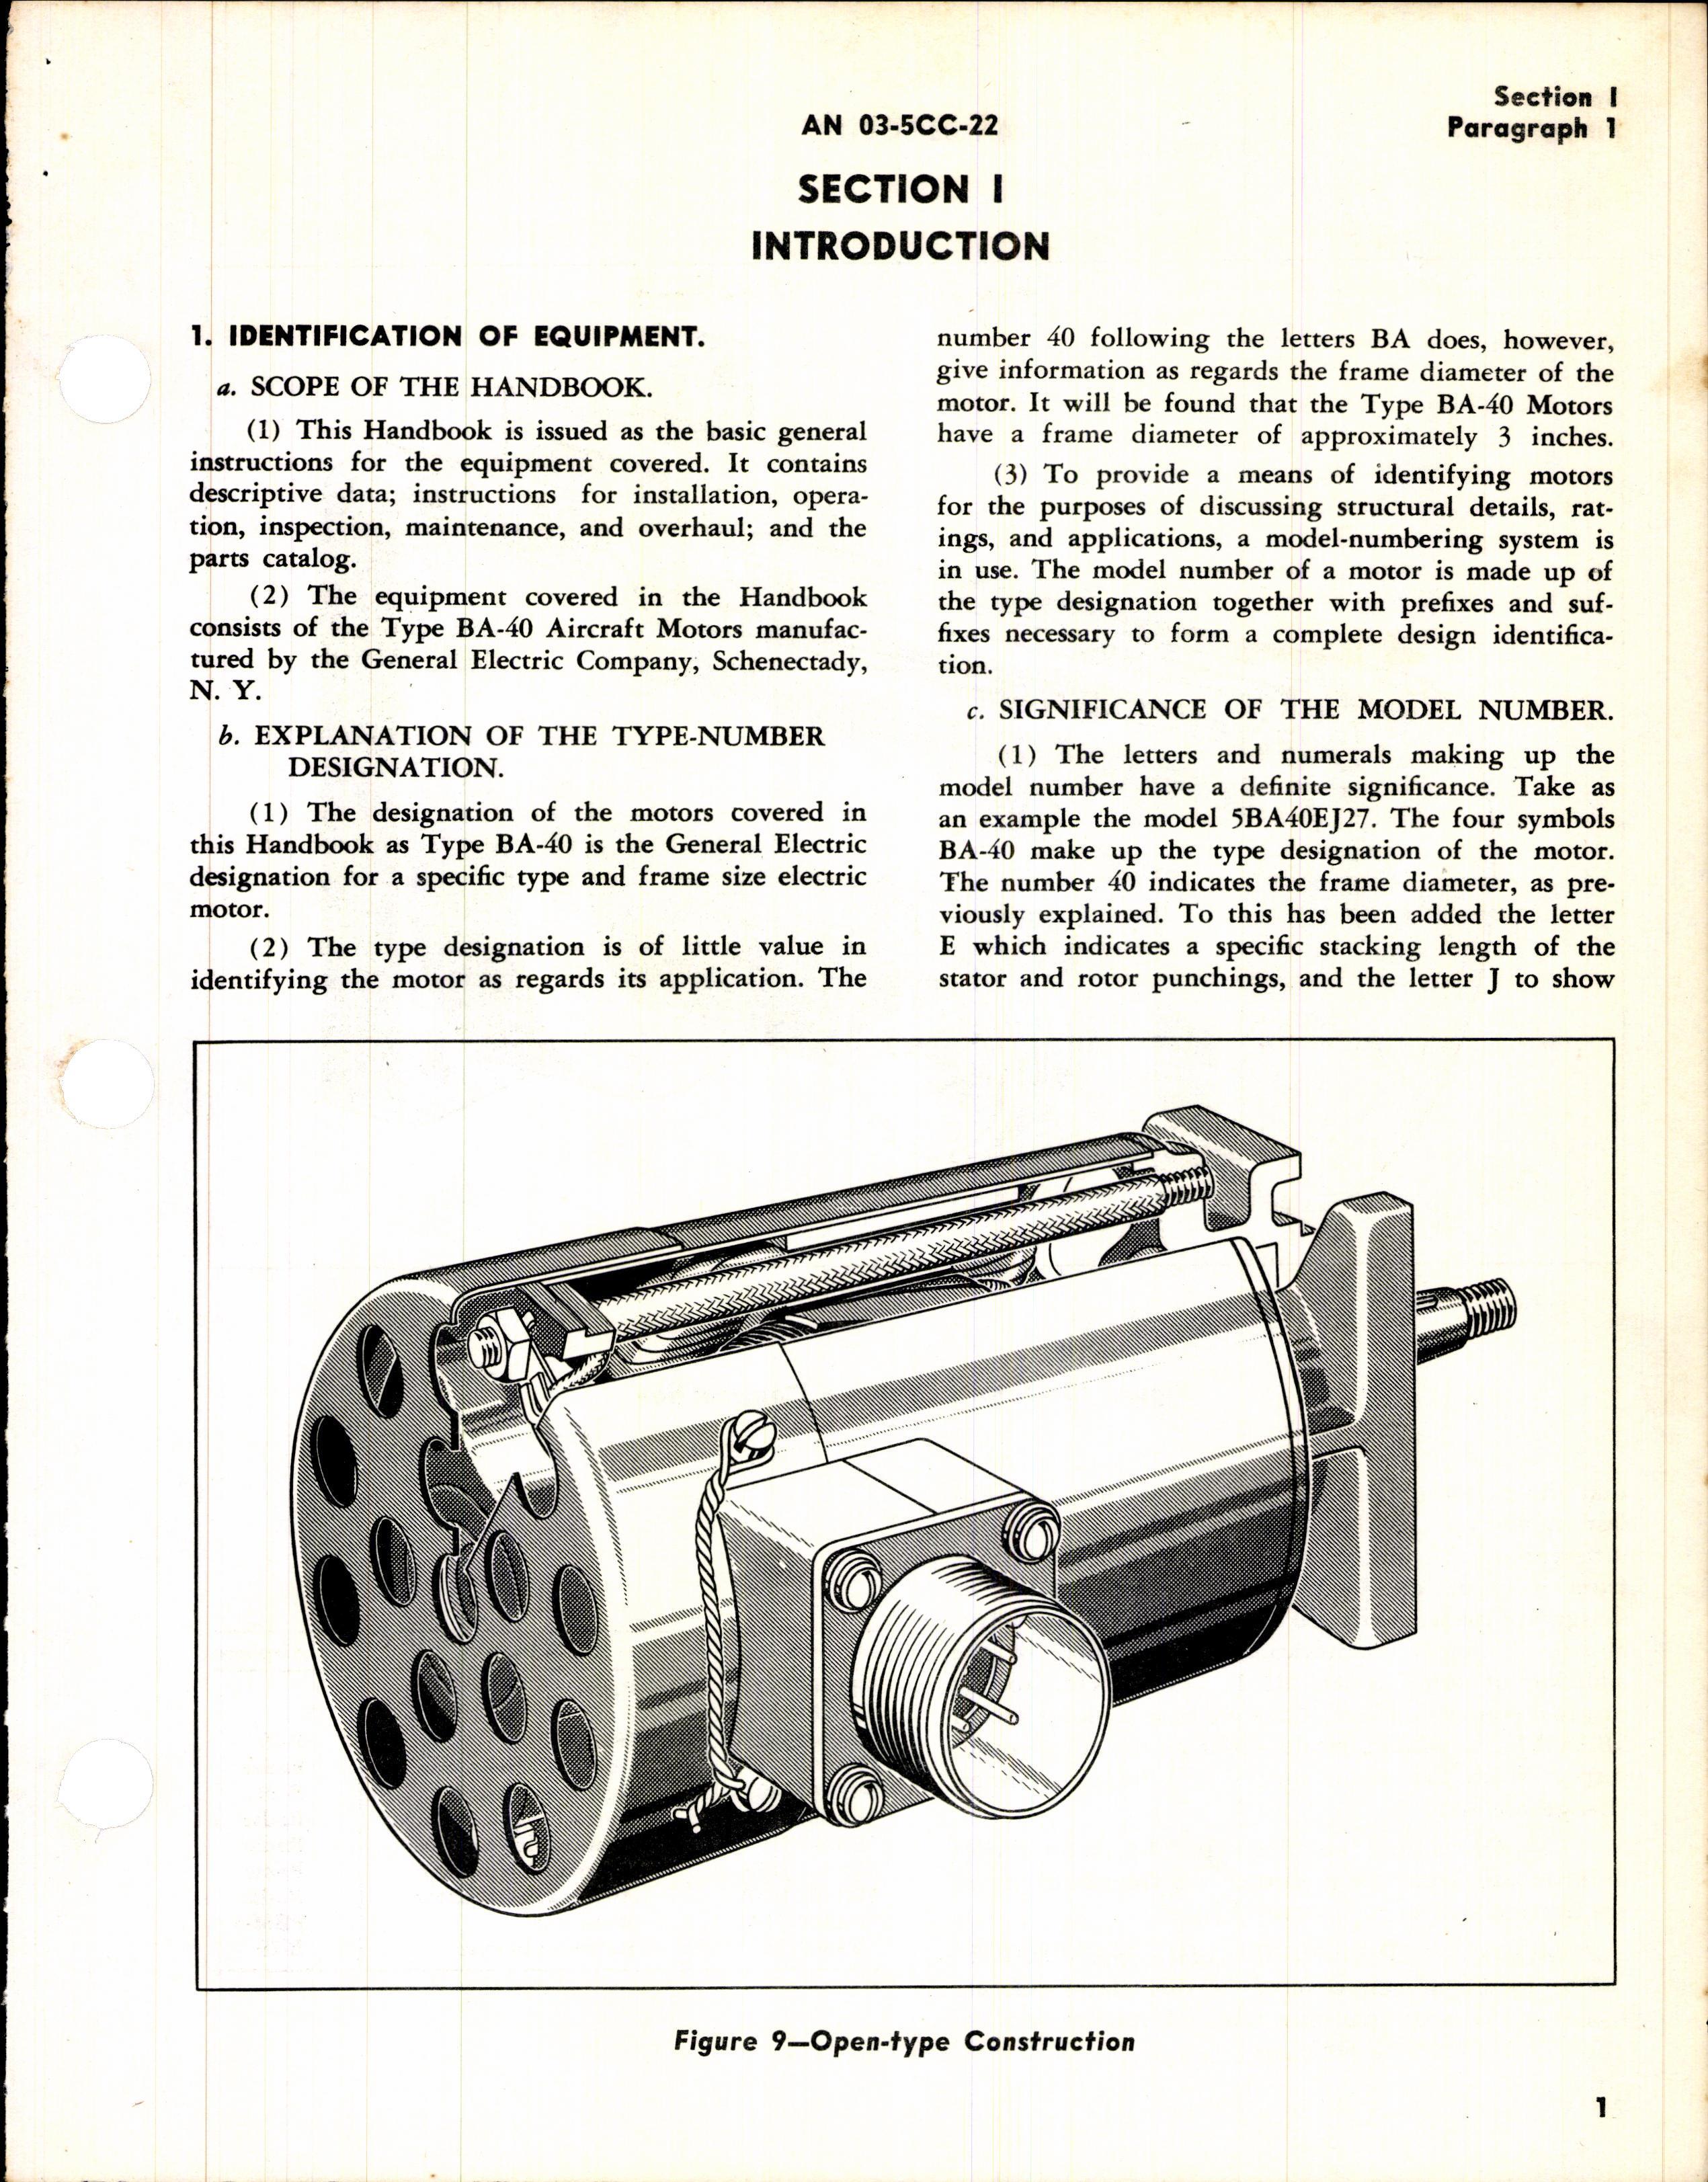 Sample page 3 from AirCorps Library document: Handbook of Instructions with Parts Catalog for Model 5BA50 Series Electric Motors